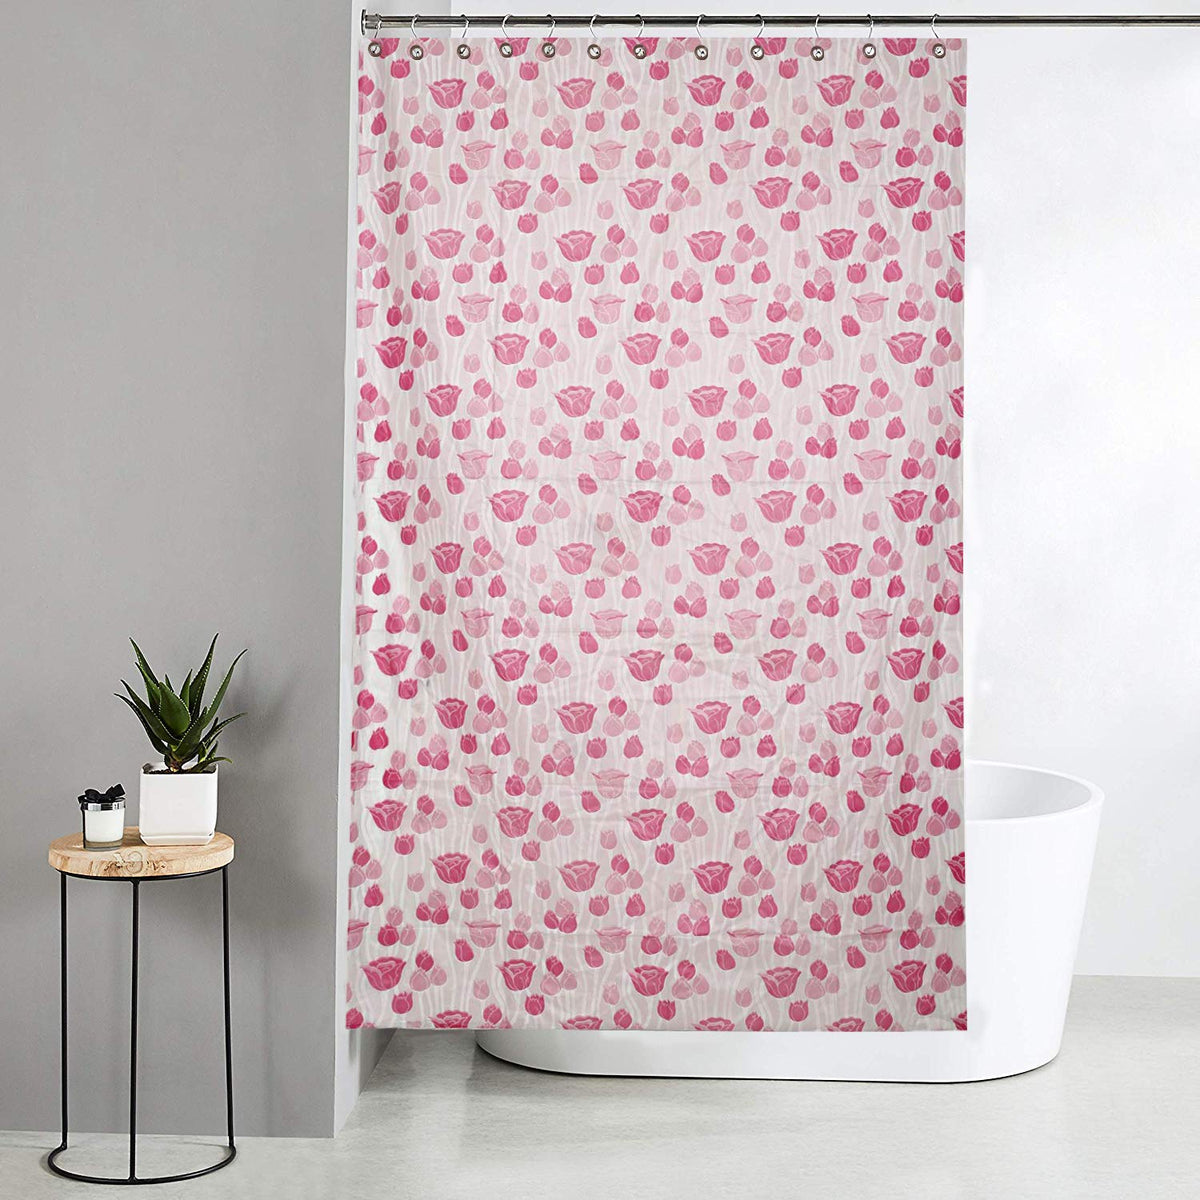 Kuber Industries Flower Design Waterproof PVC Floral Shower Curtain with 8 Hooks (CTKTC33762, Pink, 54 x 84 inch)